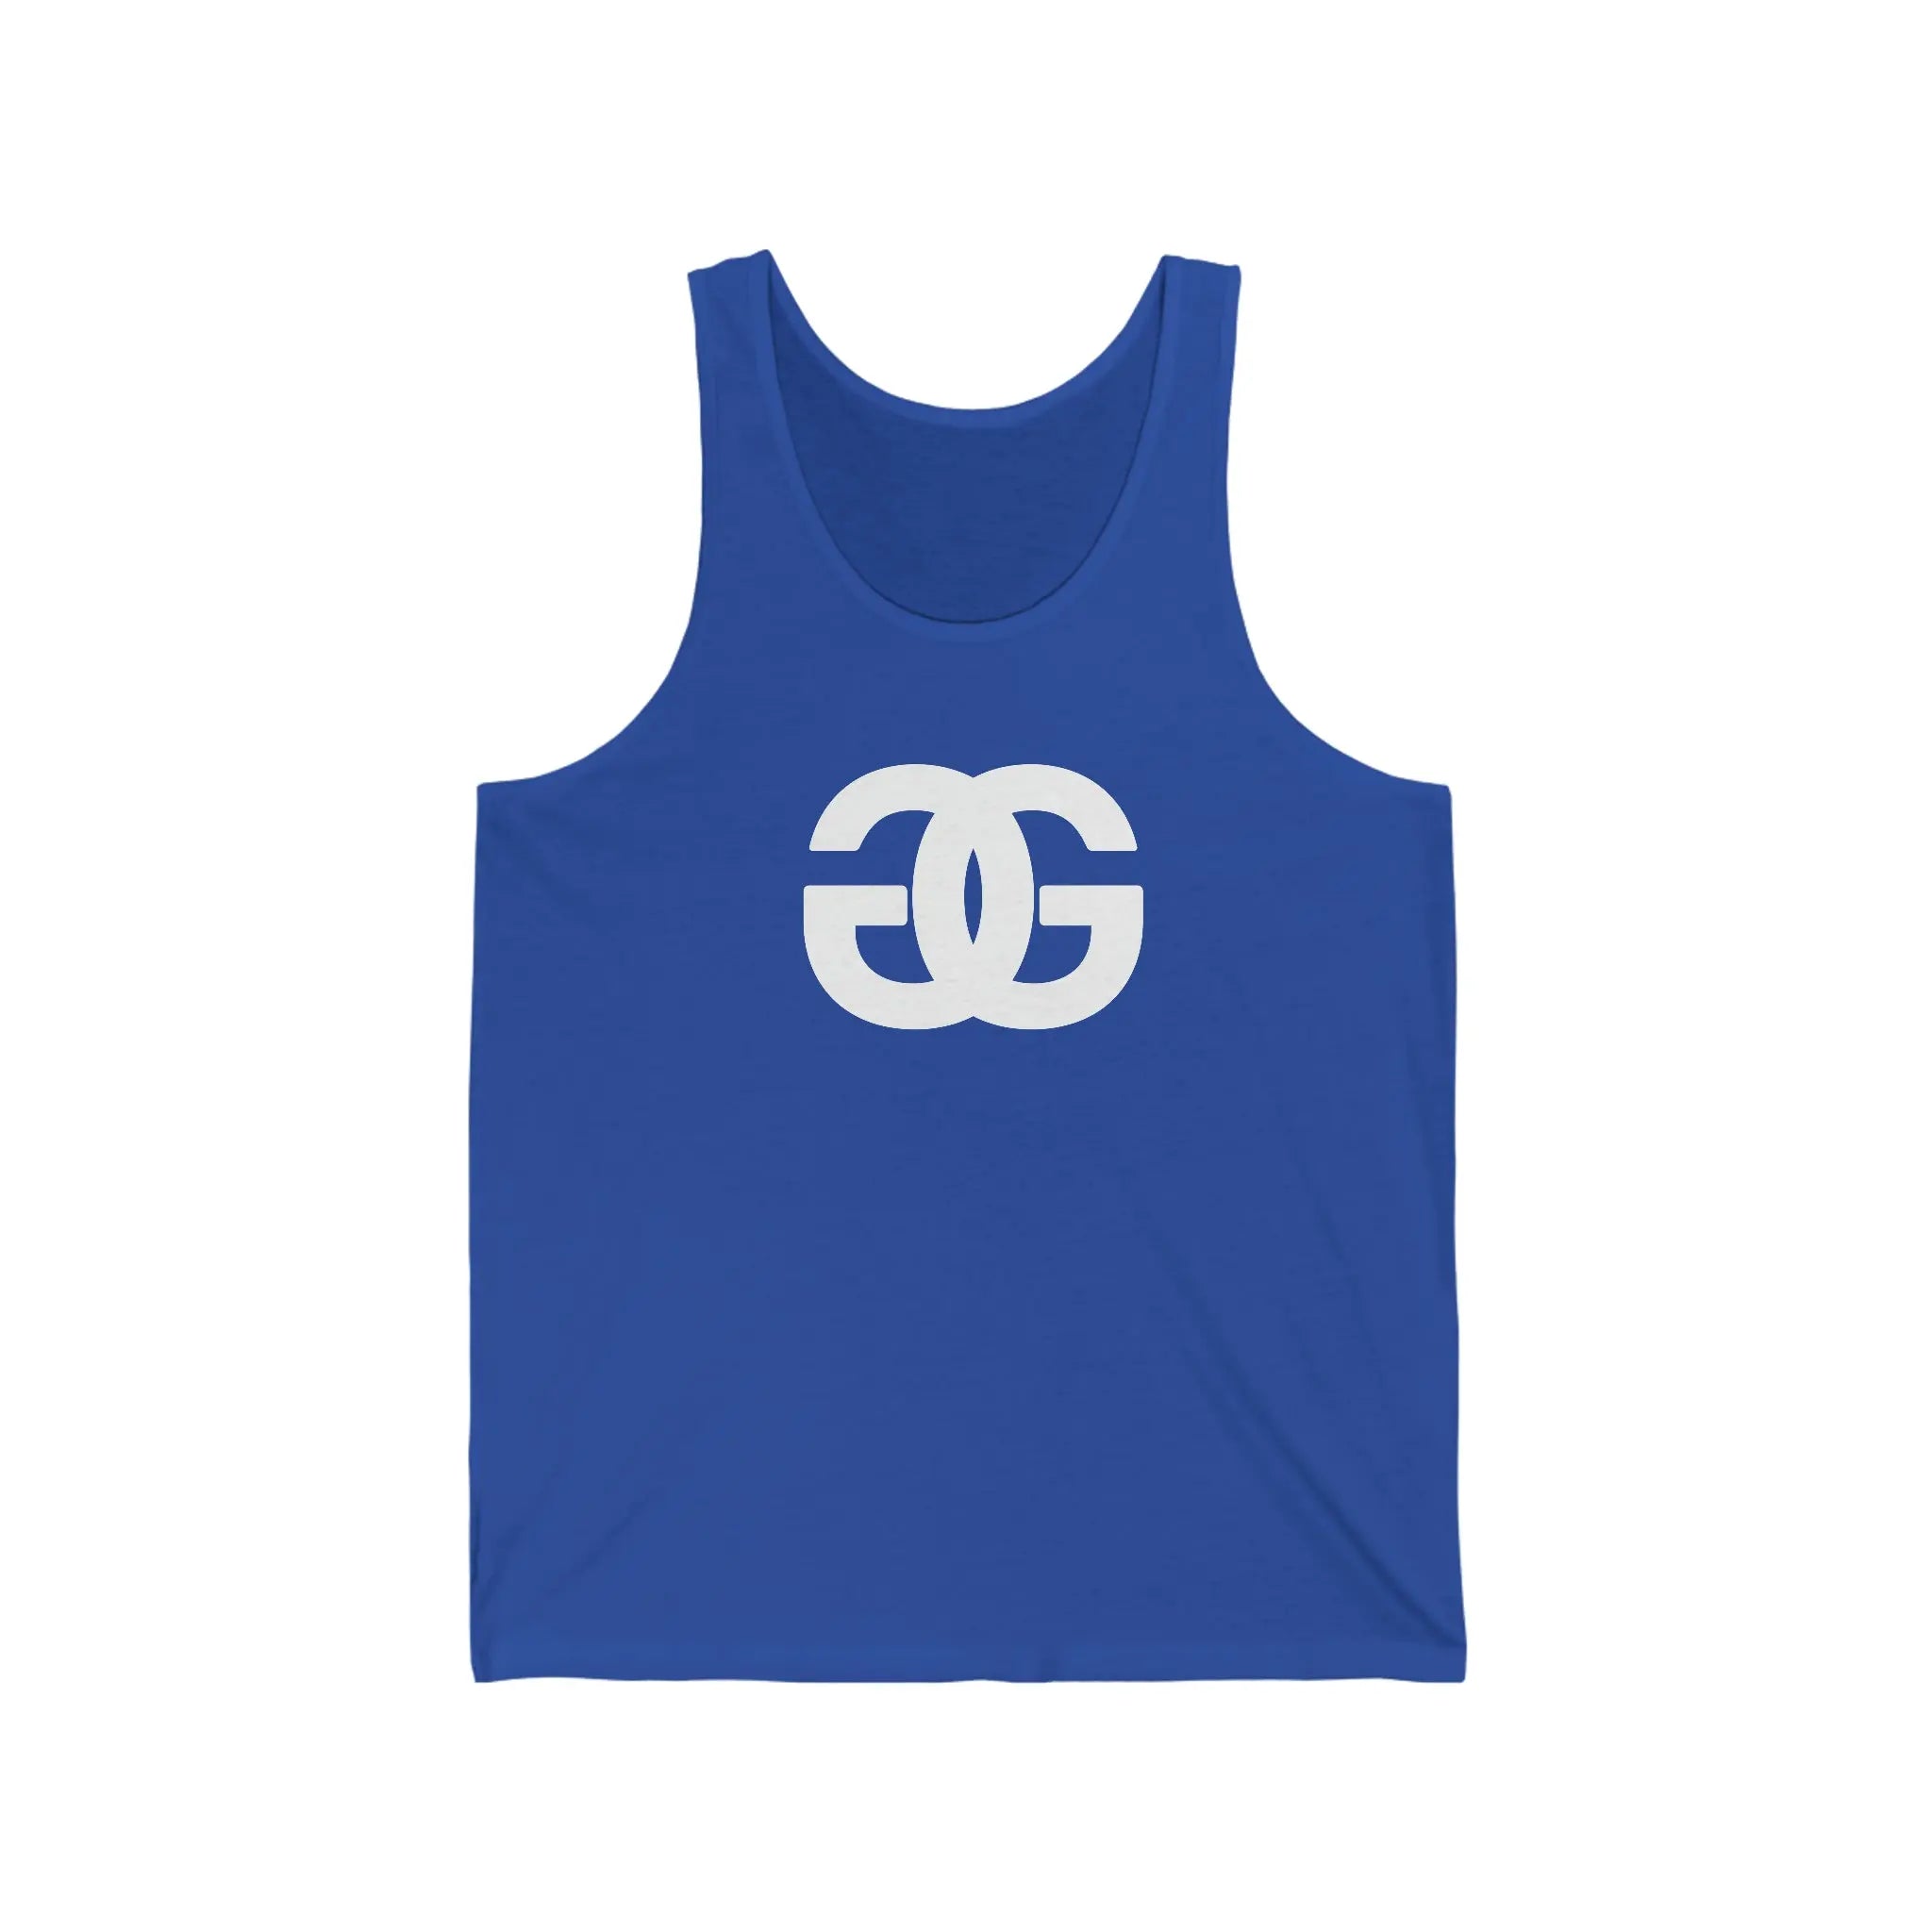  G is for Groove Relaxed Fit Jersey Tank Tank Top2XLTrueRoyal